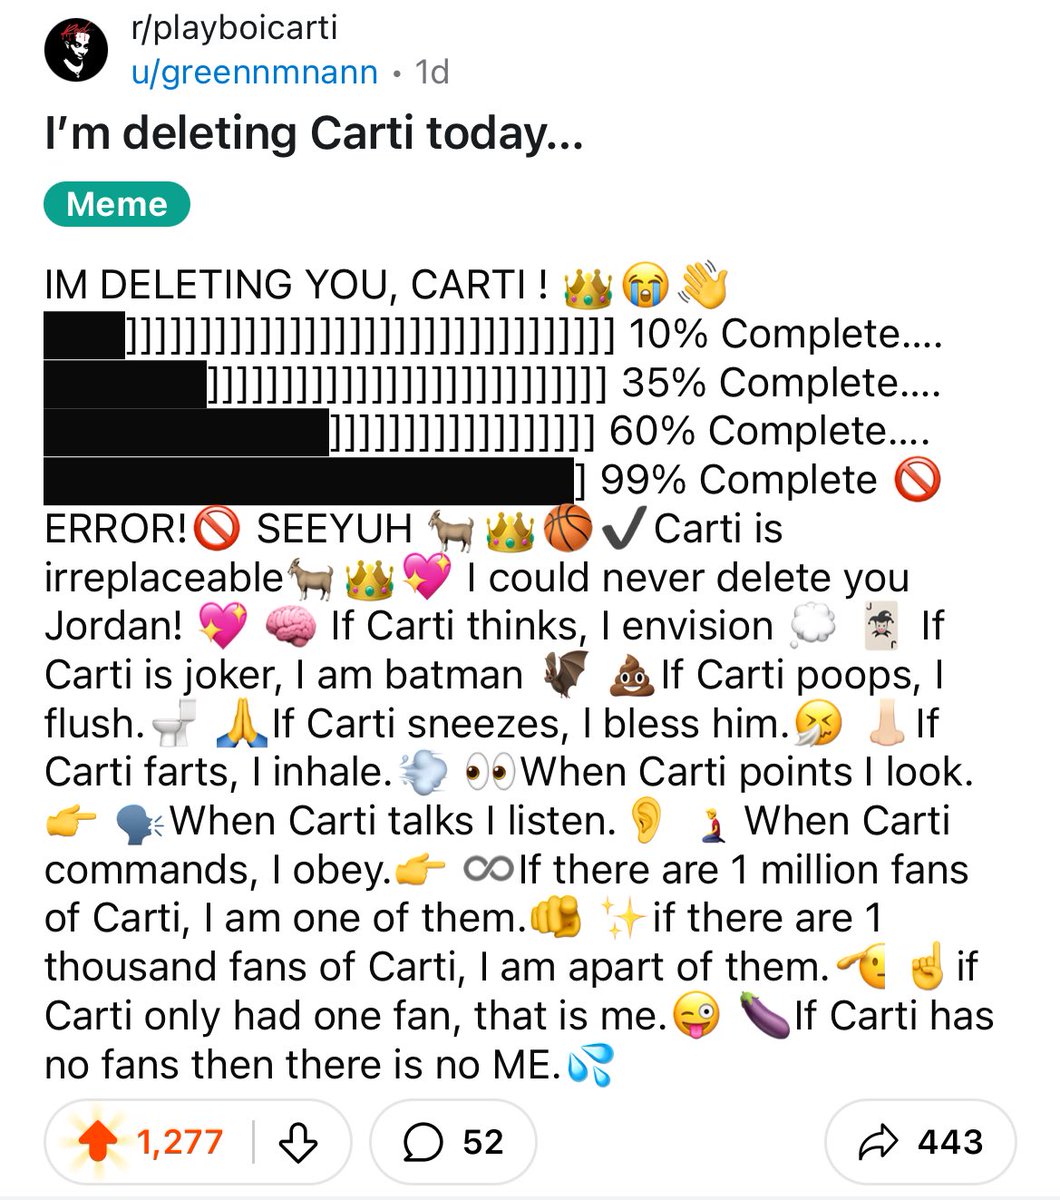 Carti fans are not real 😭